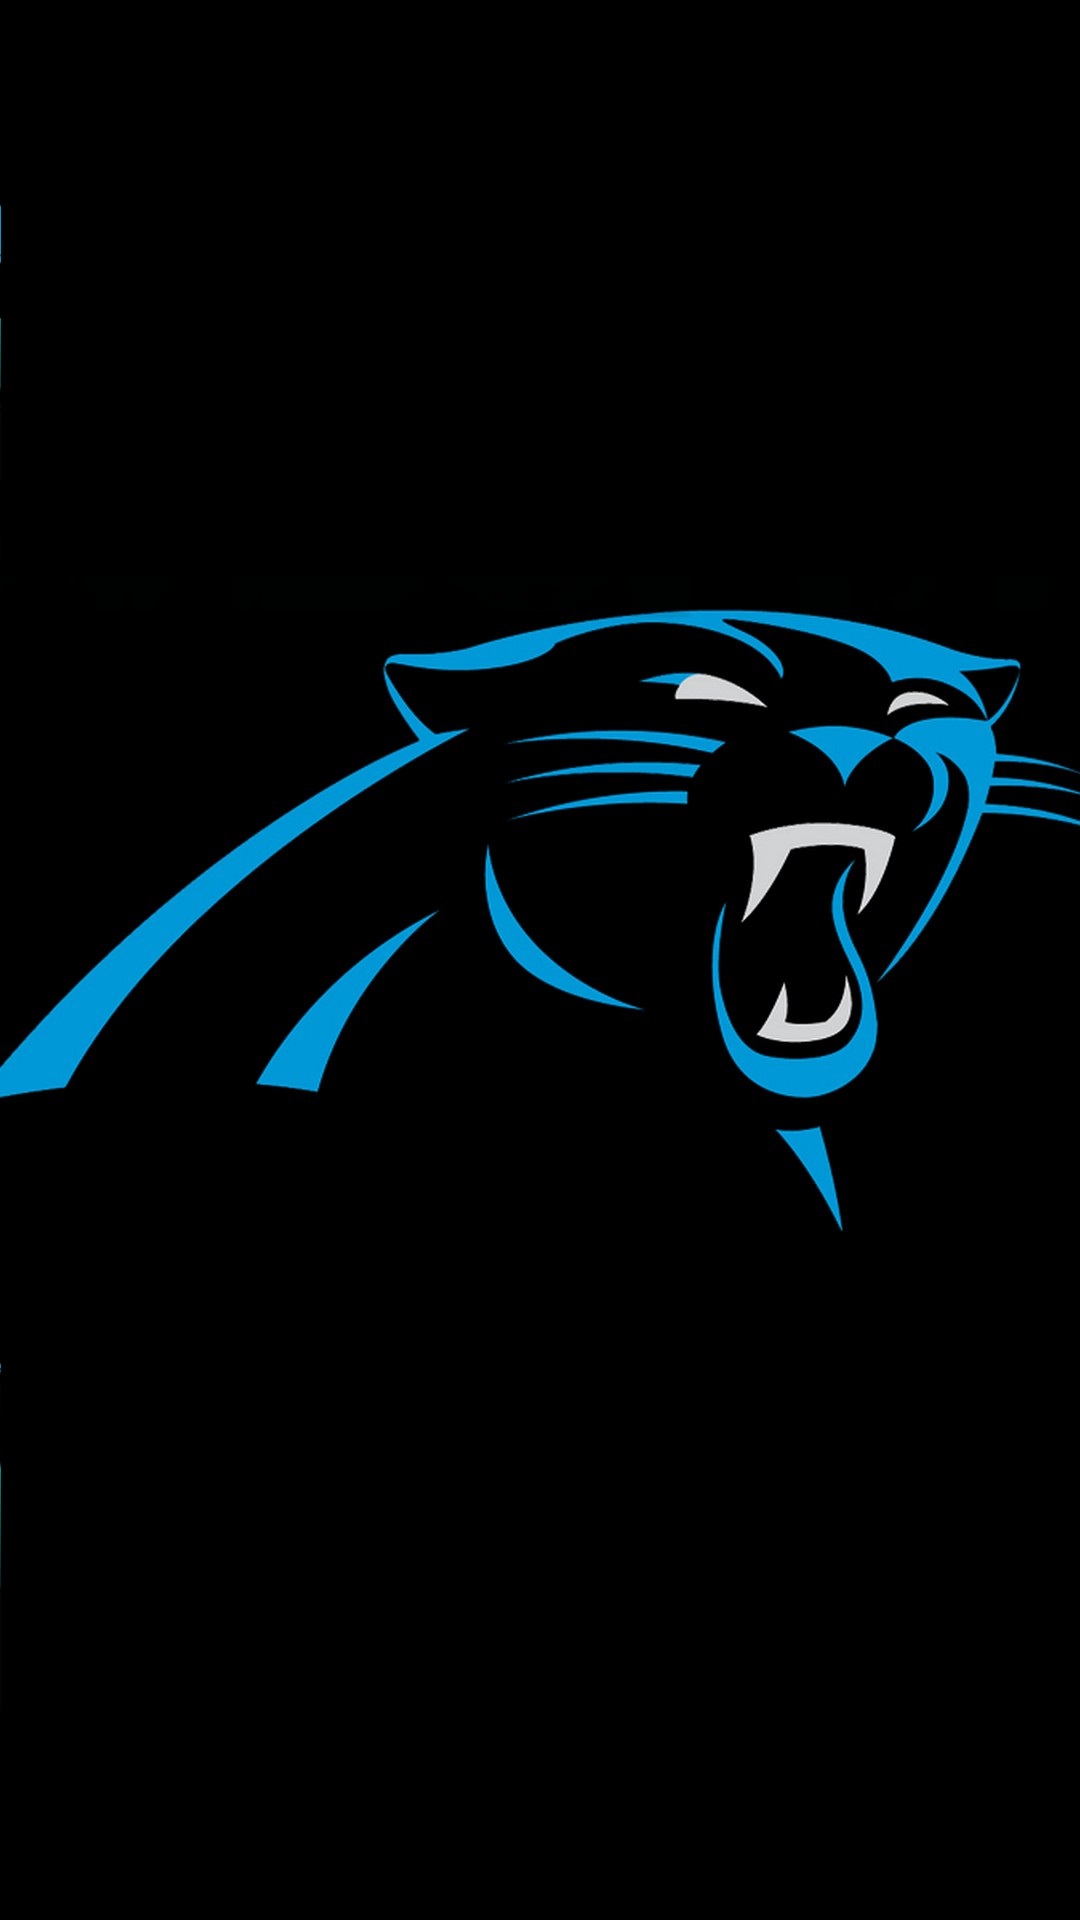 Carolina Panthers iPhone 6 Wallpaper With high-resolution 1080X1920 pixel. Download and set as wallpaper for Apple iPhone X, XS Max, XR, 8, 7, 6, SE, iPad, Android